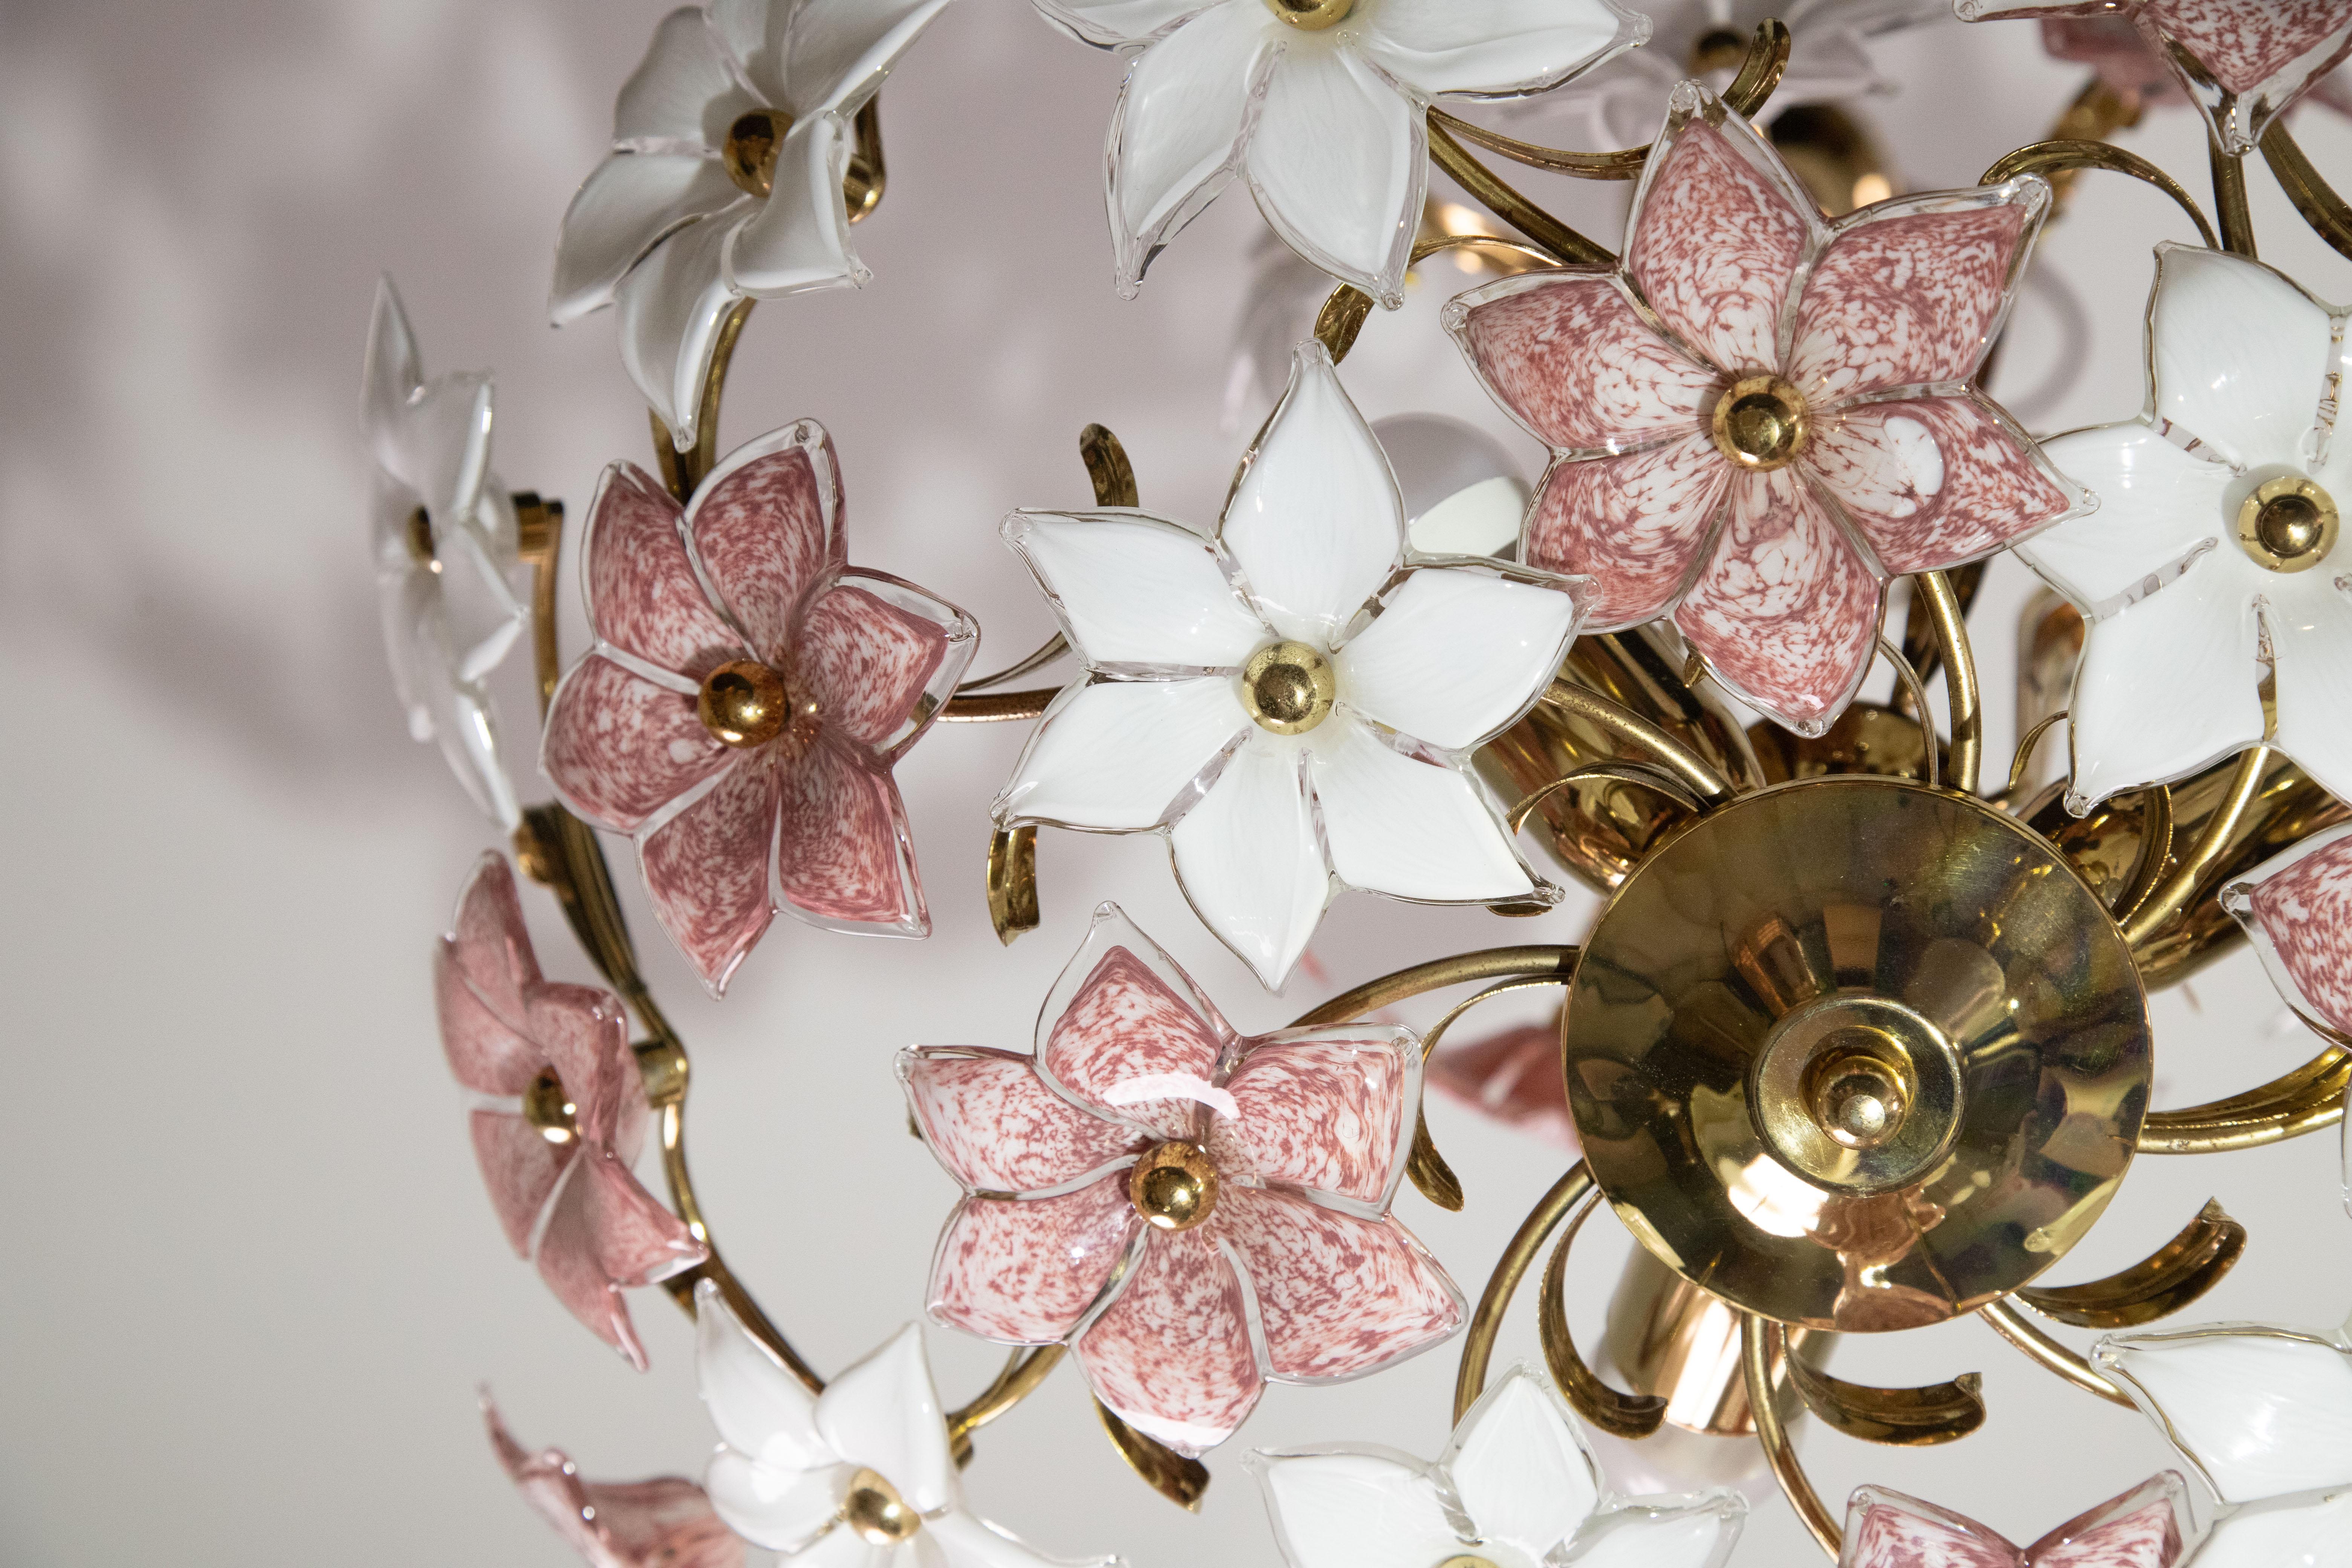 Spectacular Murano Chandelier Full of Pink and White Flowers, 1980s For Sale 7